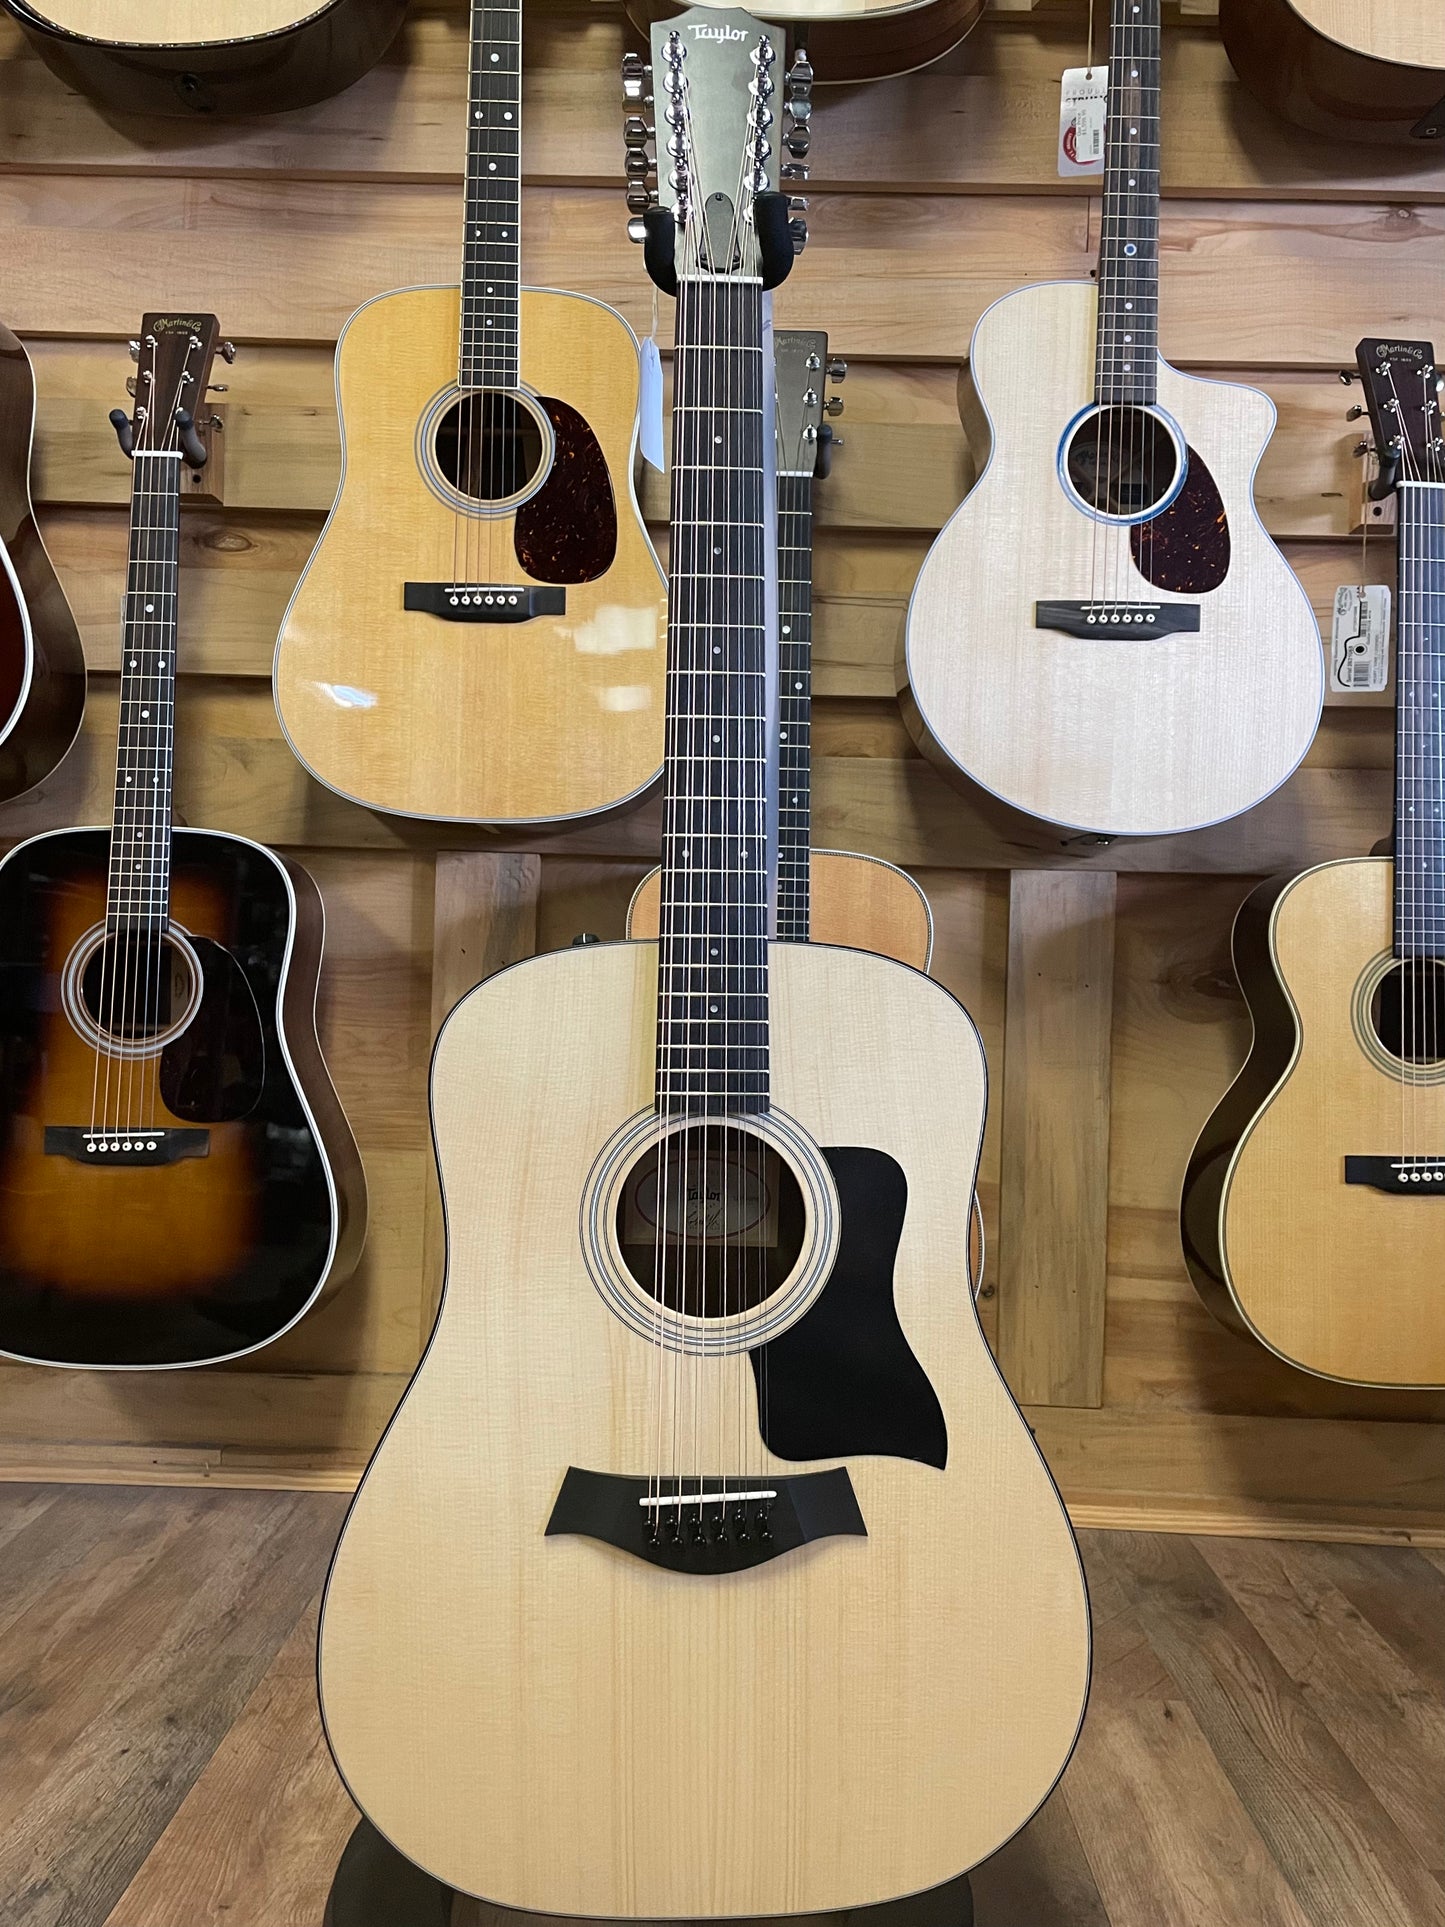 Taylor 150e 12-string Acoustic-electric Guitar-Natural (NEW)